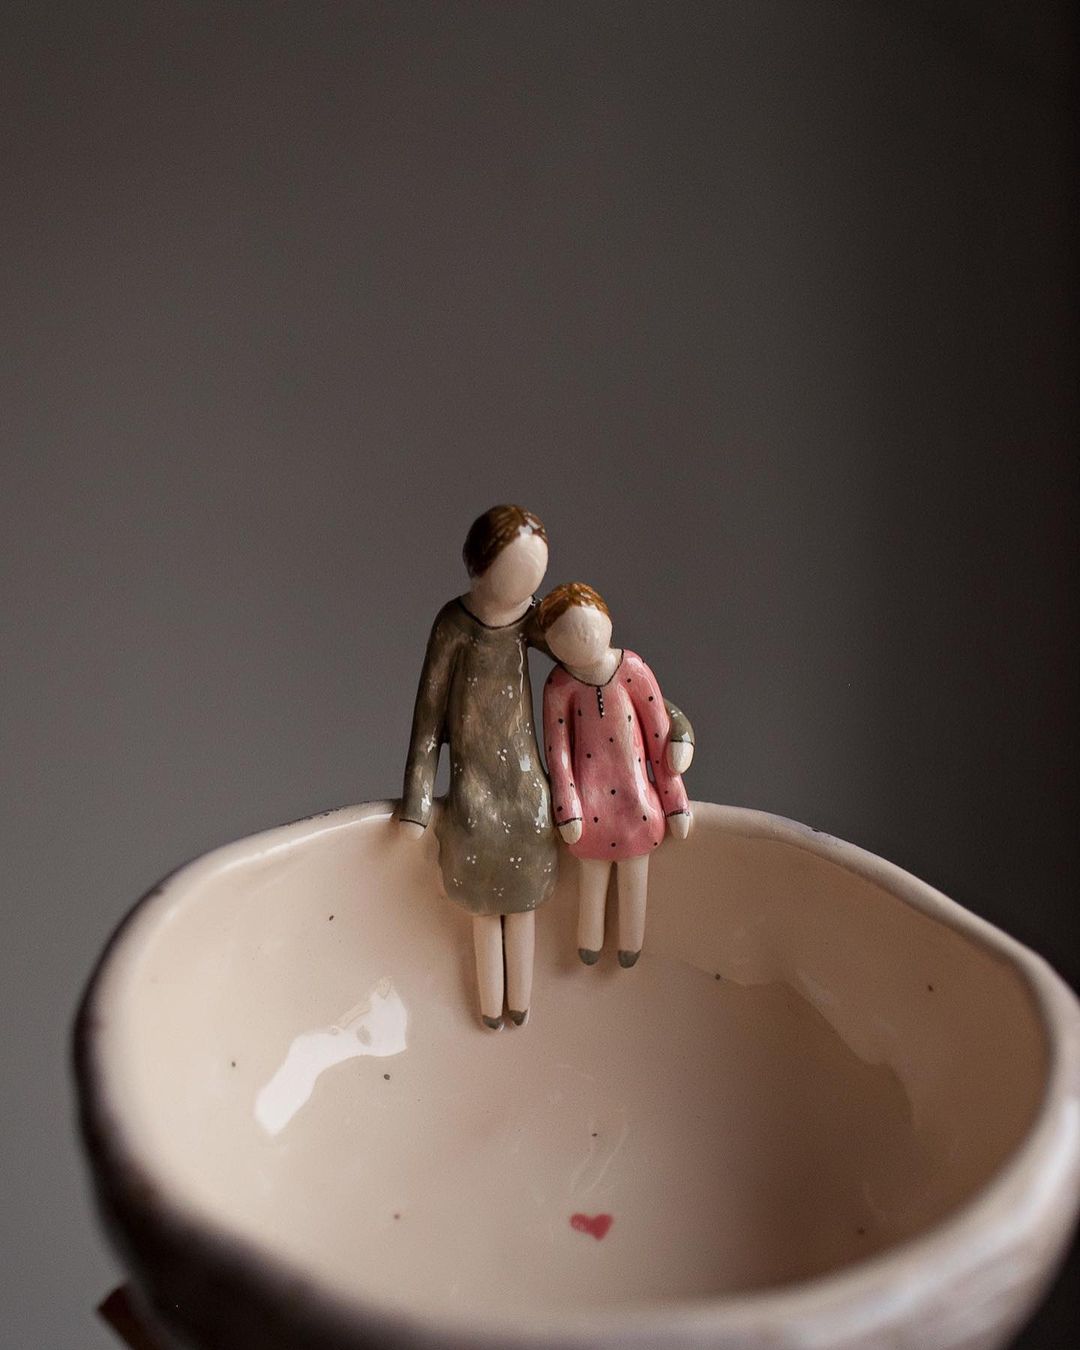 Delicate Ceramics Decorated With Lovely Figure Sculptures By Nadya And Olga (13)